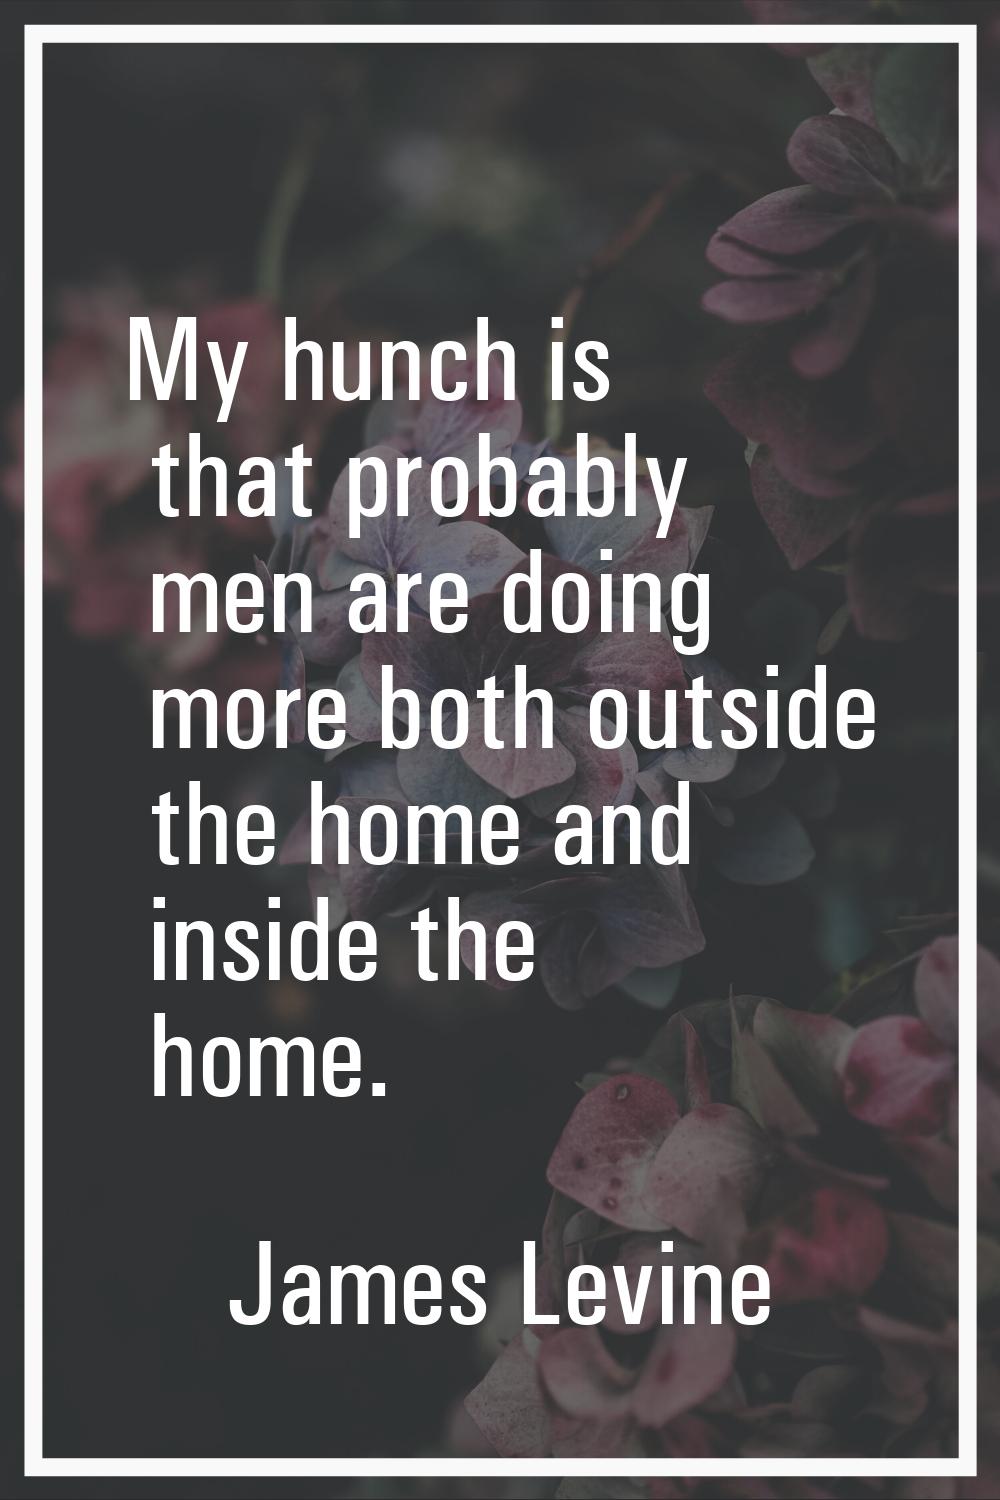 My hunch is that probably men are doing more both outside the home and inside the home.